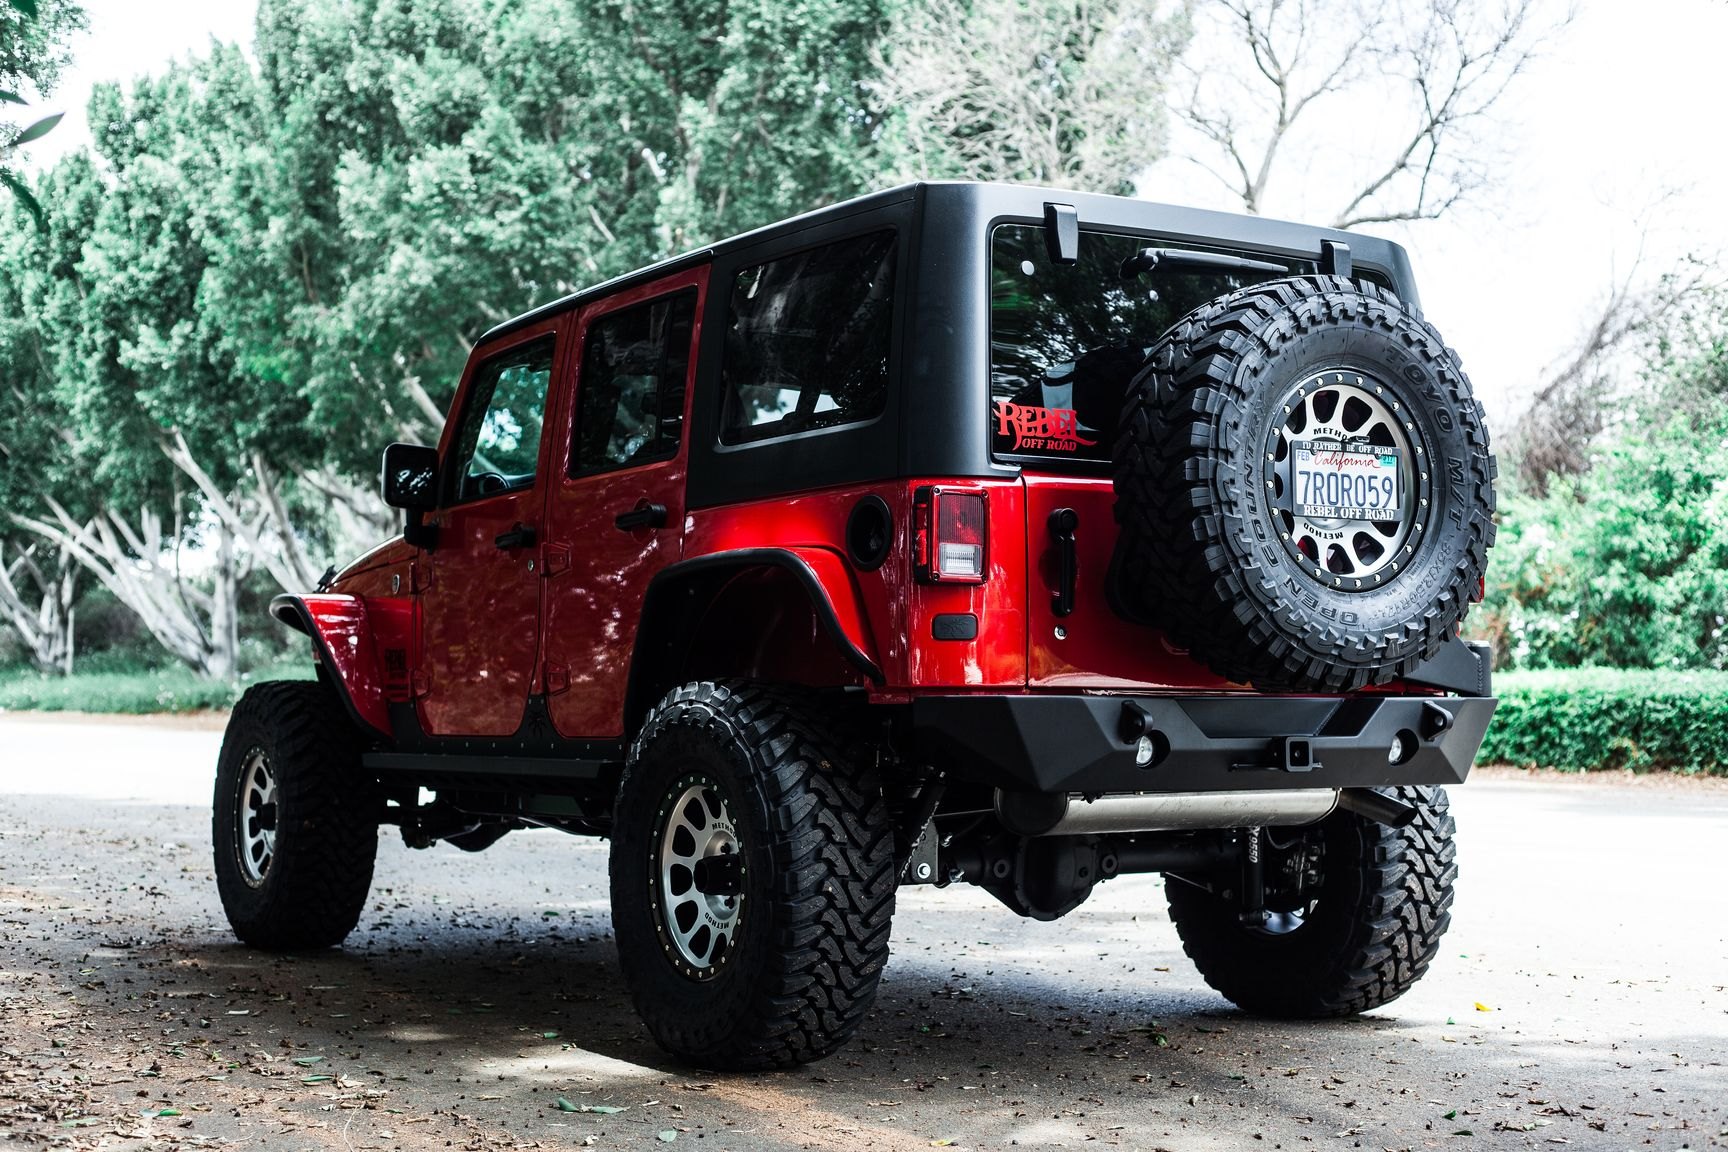 Off-Road Rear Bumper on Red Jeep Wrangler Rubicon - Photo by Rebel Off-Road